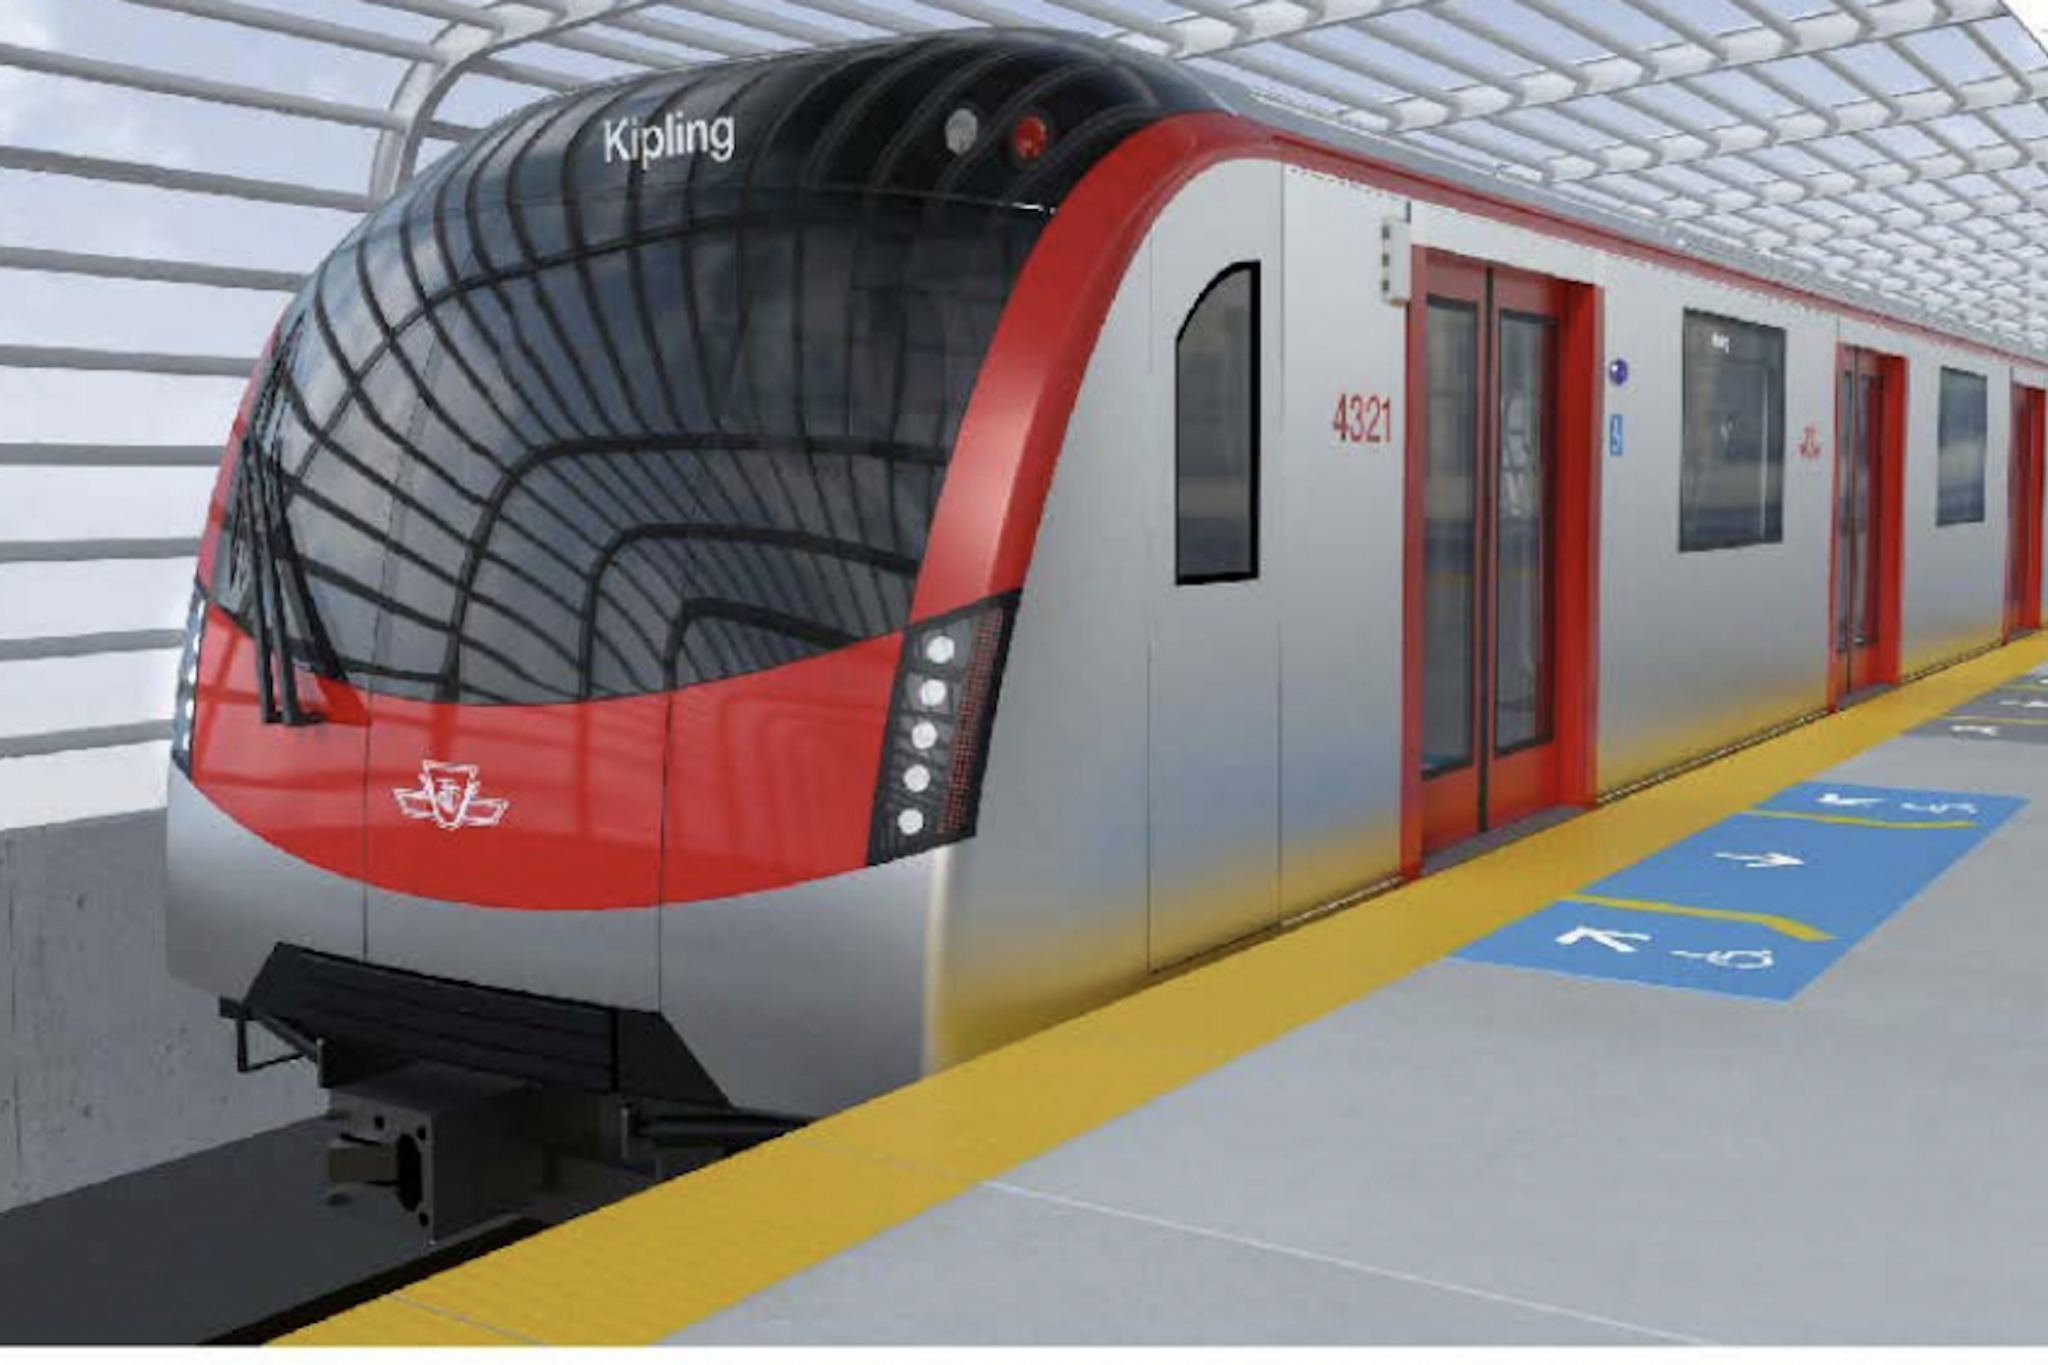 The TTC is looking to add hundreds of brand new red subway cars